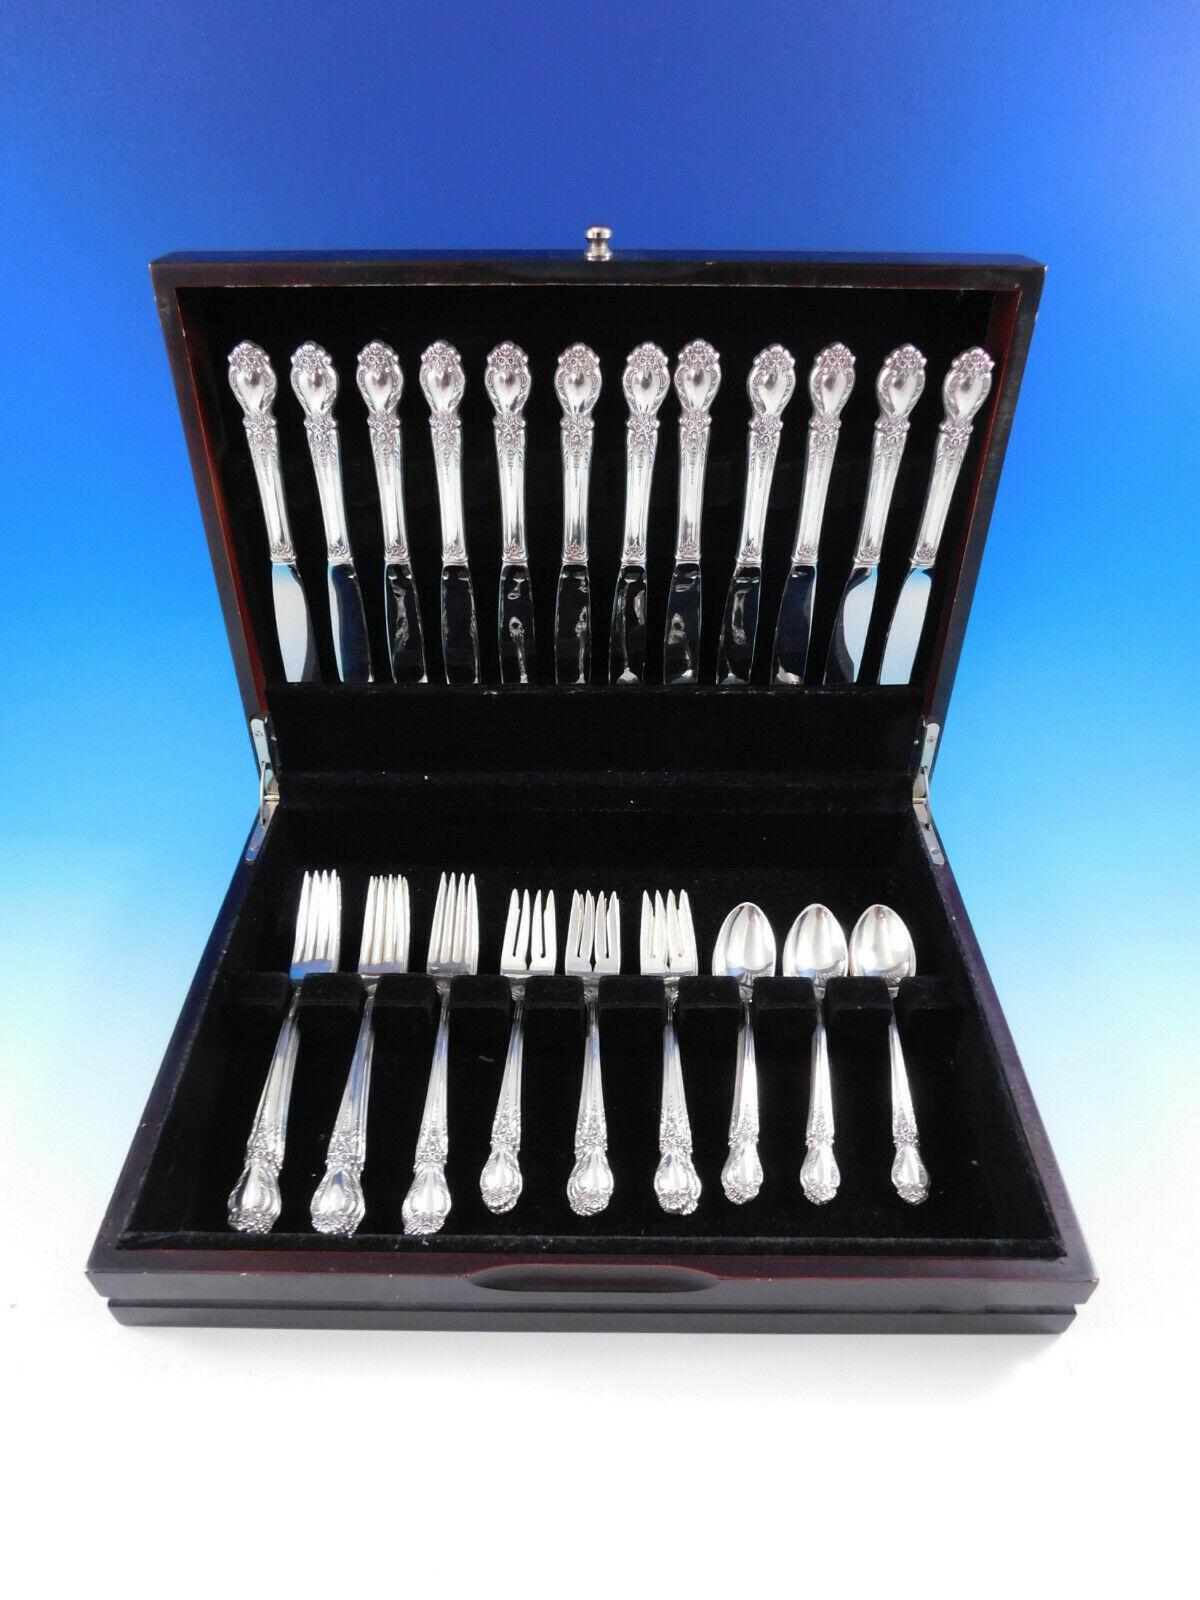 Heirloom quality Brocade by International sterling silver Flatware set, 48 pieces. This set includes:

12 knives, 9 1/4